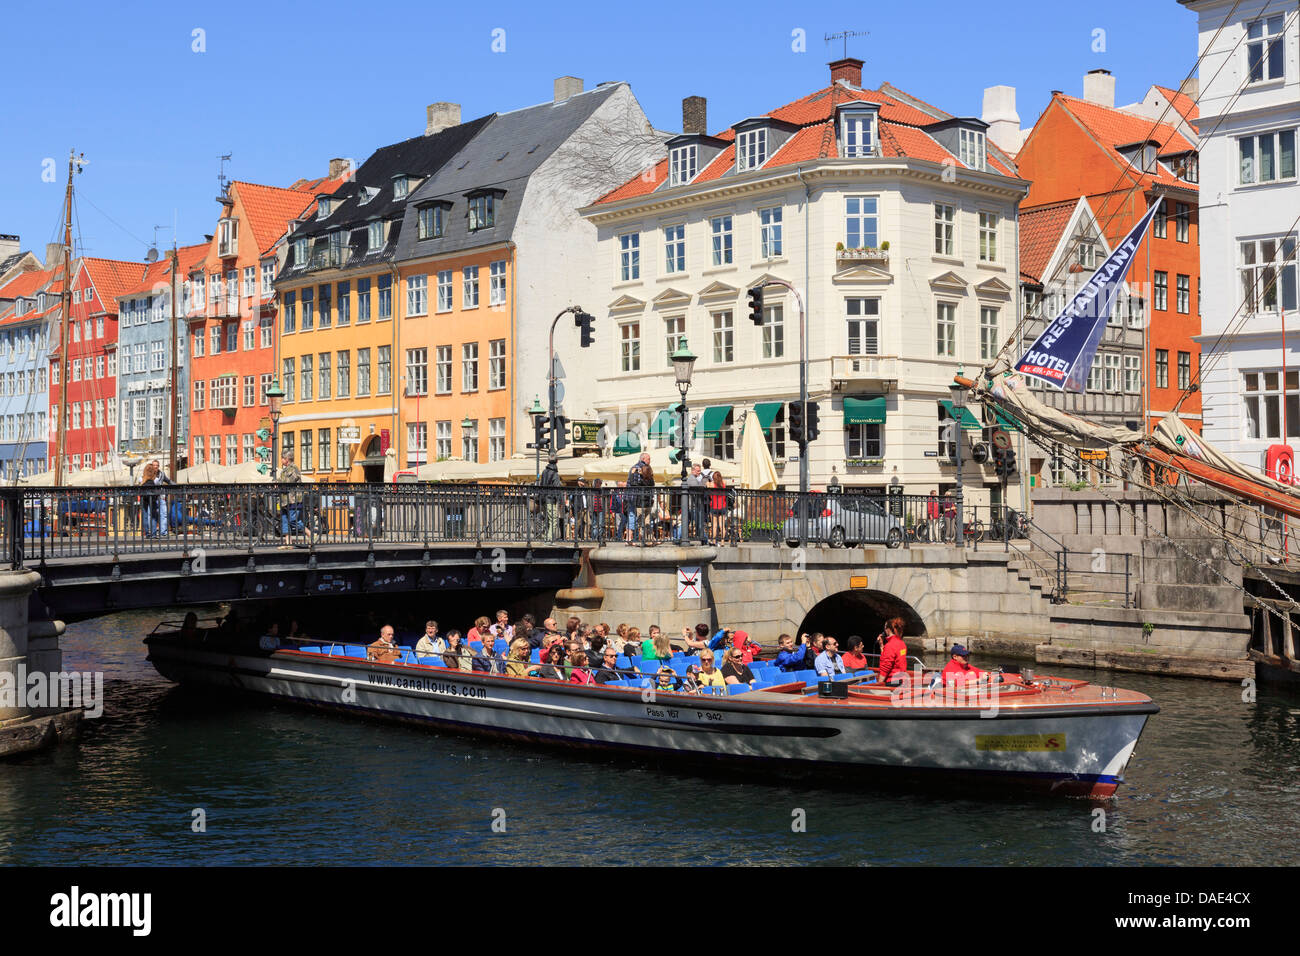 Tourists on canal tour boat passing under low bridge with colourful buildings in Nyhavn harbour, Copenhagen, Zealand, Denmark Stock Photo